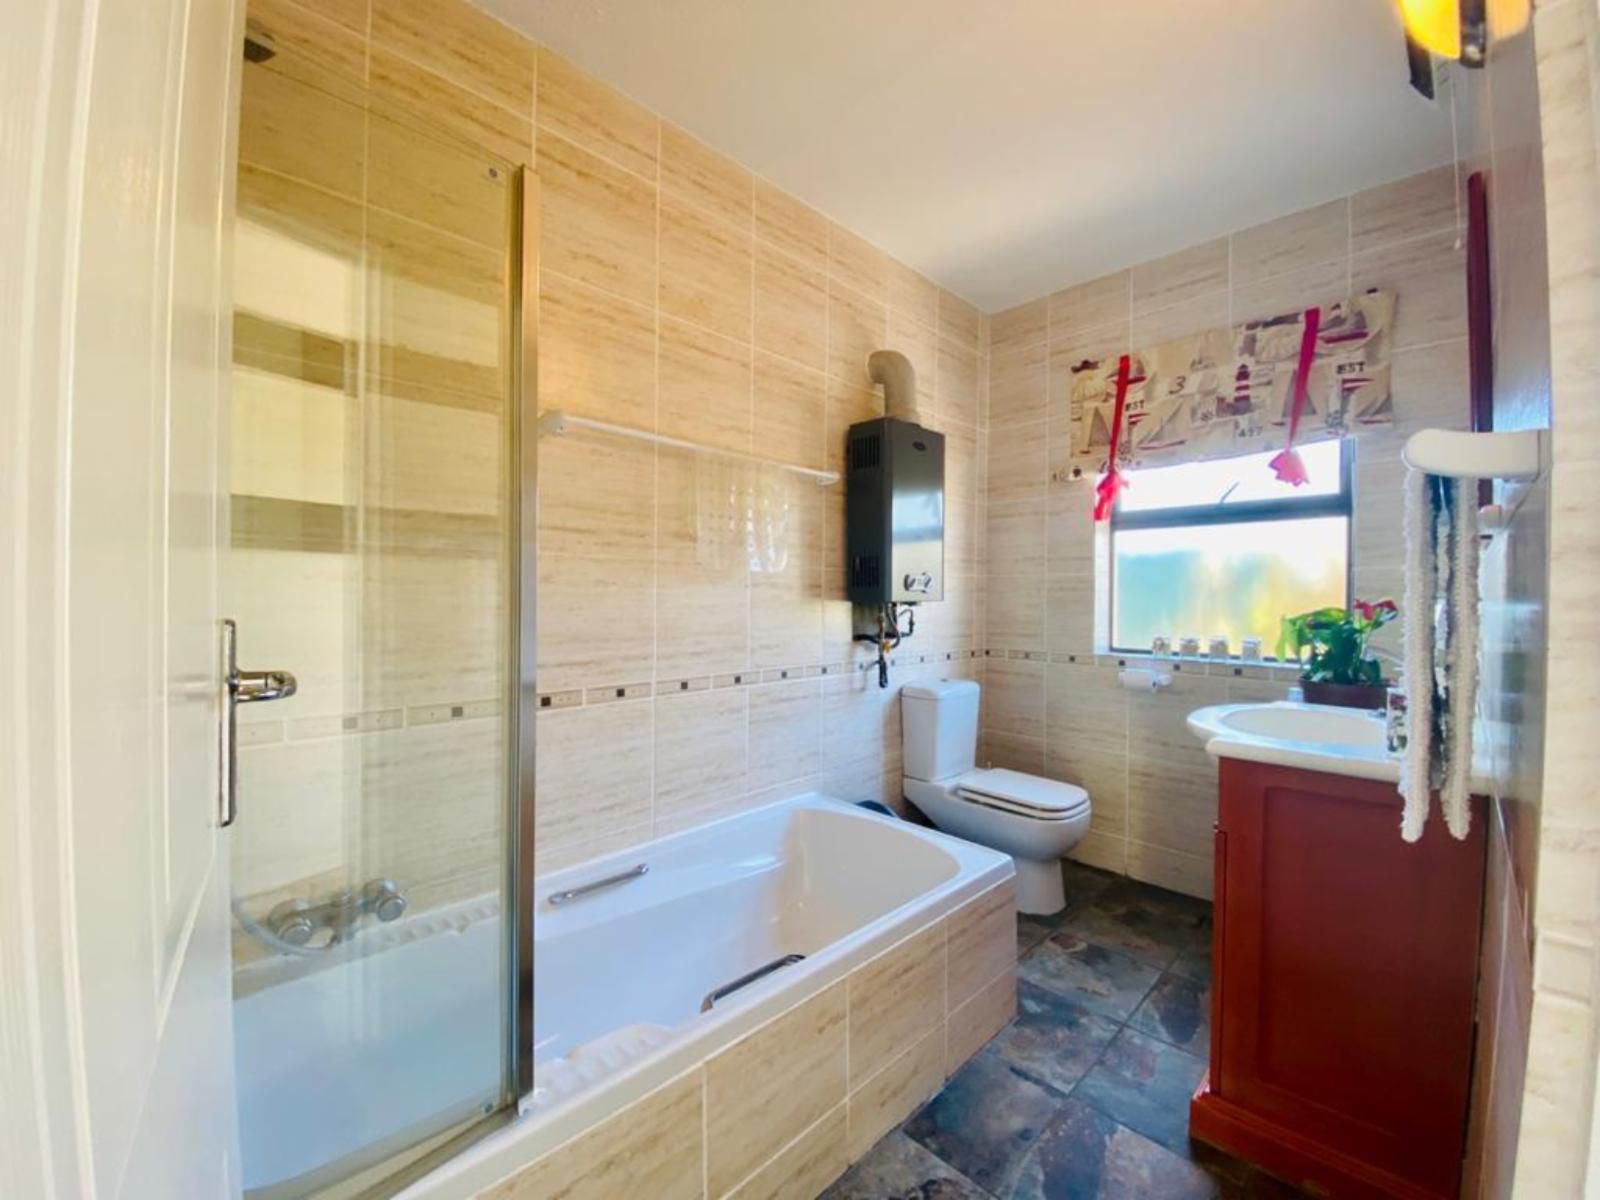 31 On Seaview Self Catering Yzerfontein Yzerfontein Western Cape South Africa Bathroom